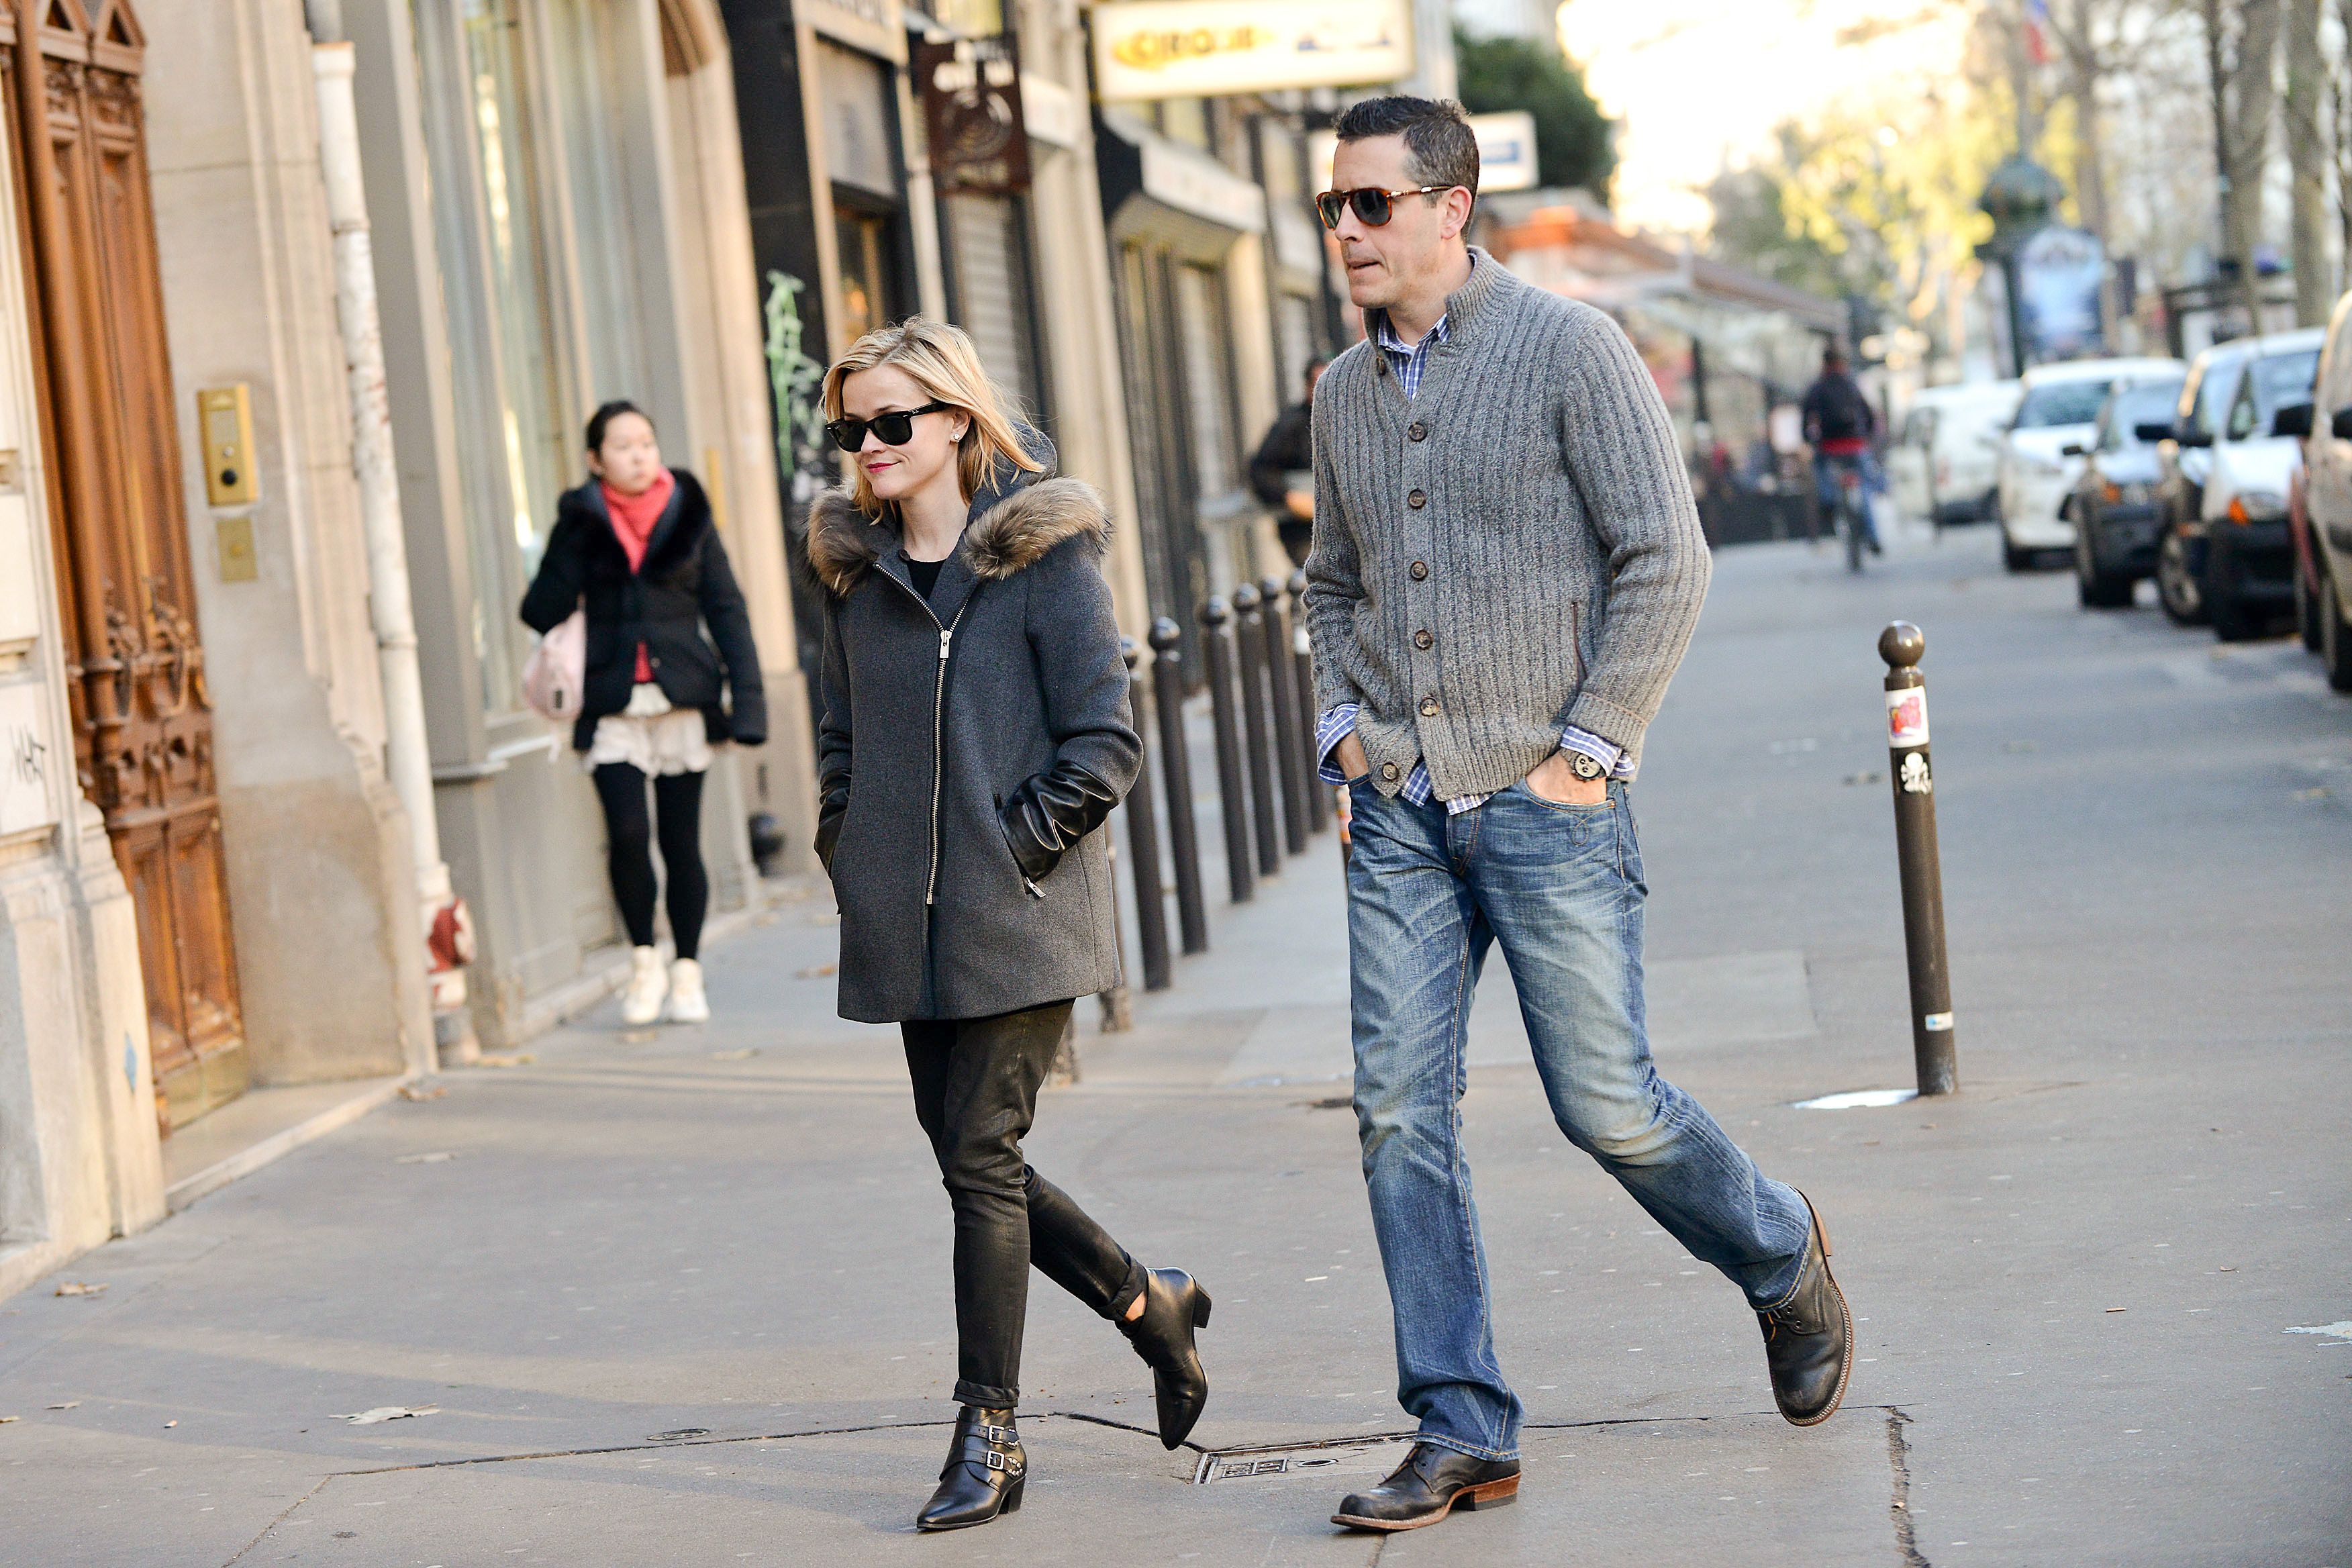 Reese Witherspoon and Jim Toth in Paris in 2013